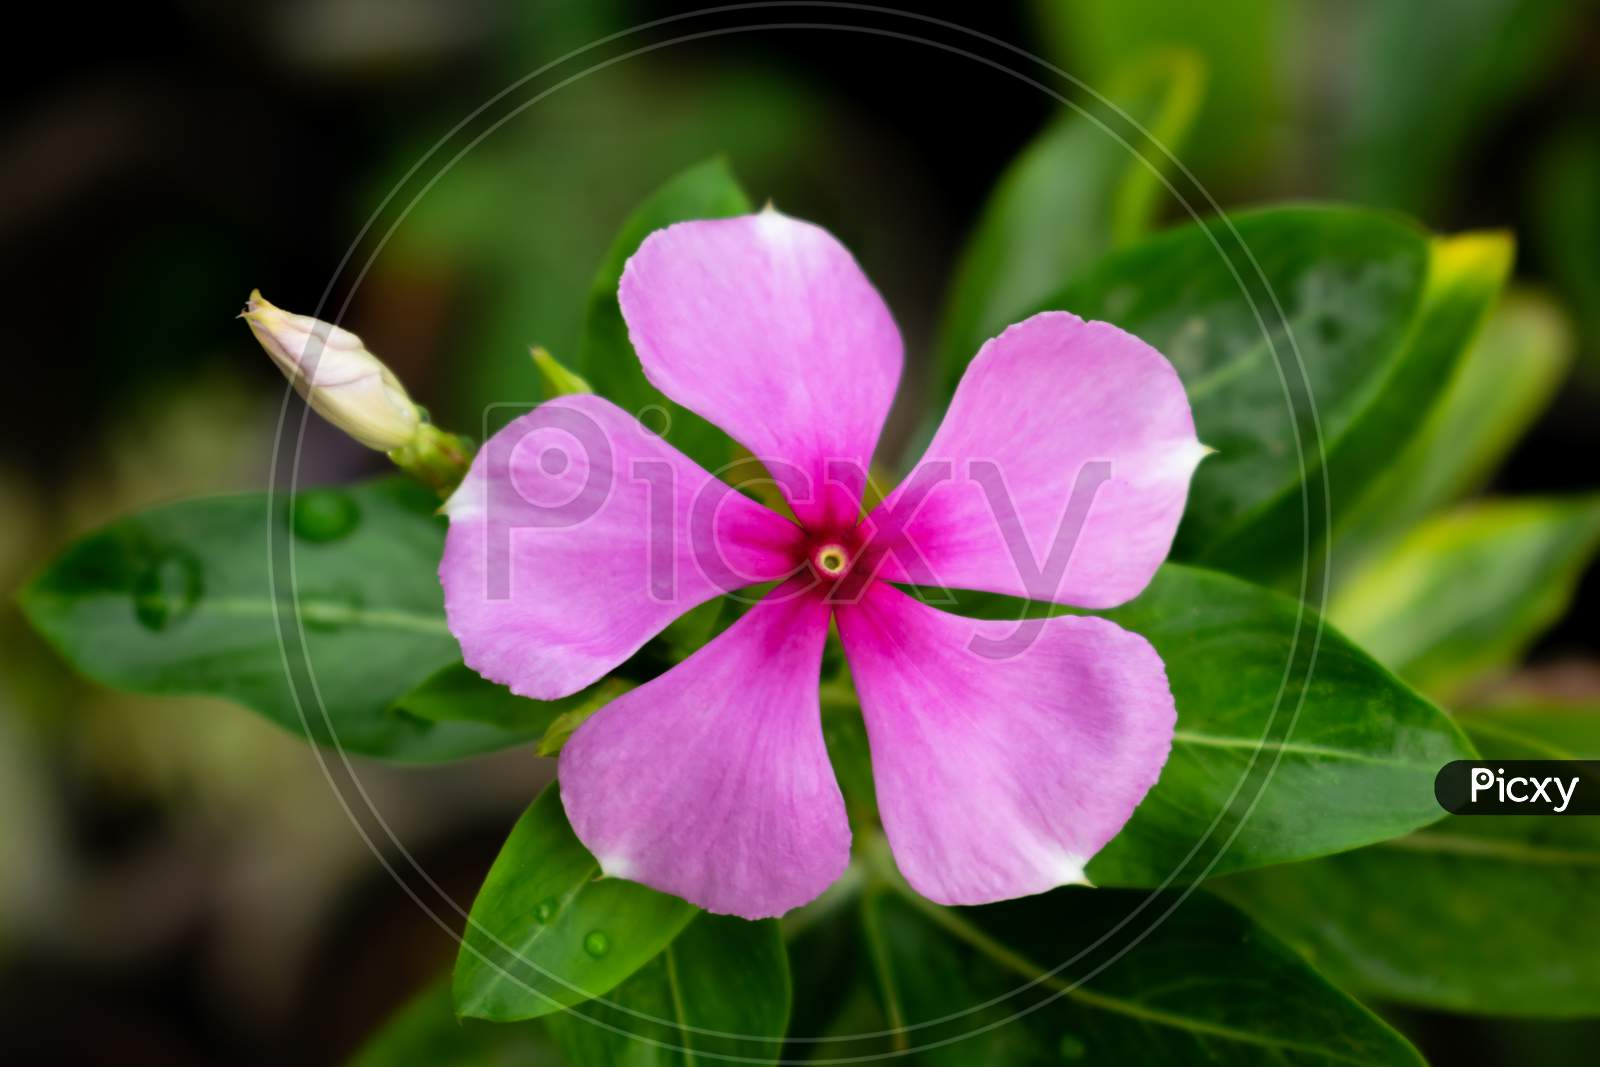 beautiful pink flower sadabhar or rose periwinkle,Catharanthus roseus, commonly known as bright eyes, Cape periwinkle, graveyard plant, Madagascar periwinkle, old maid, pink periwinkle view.